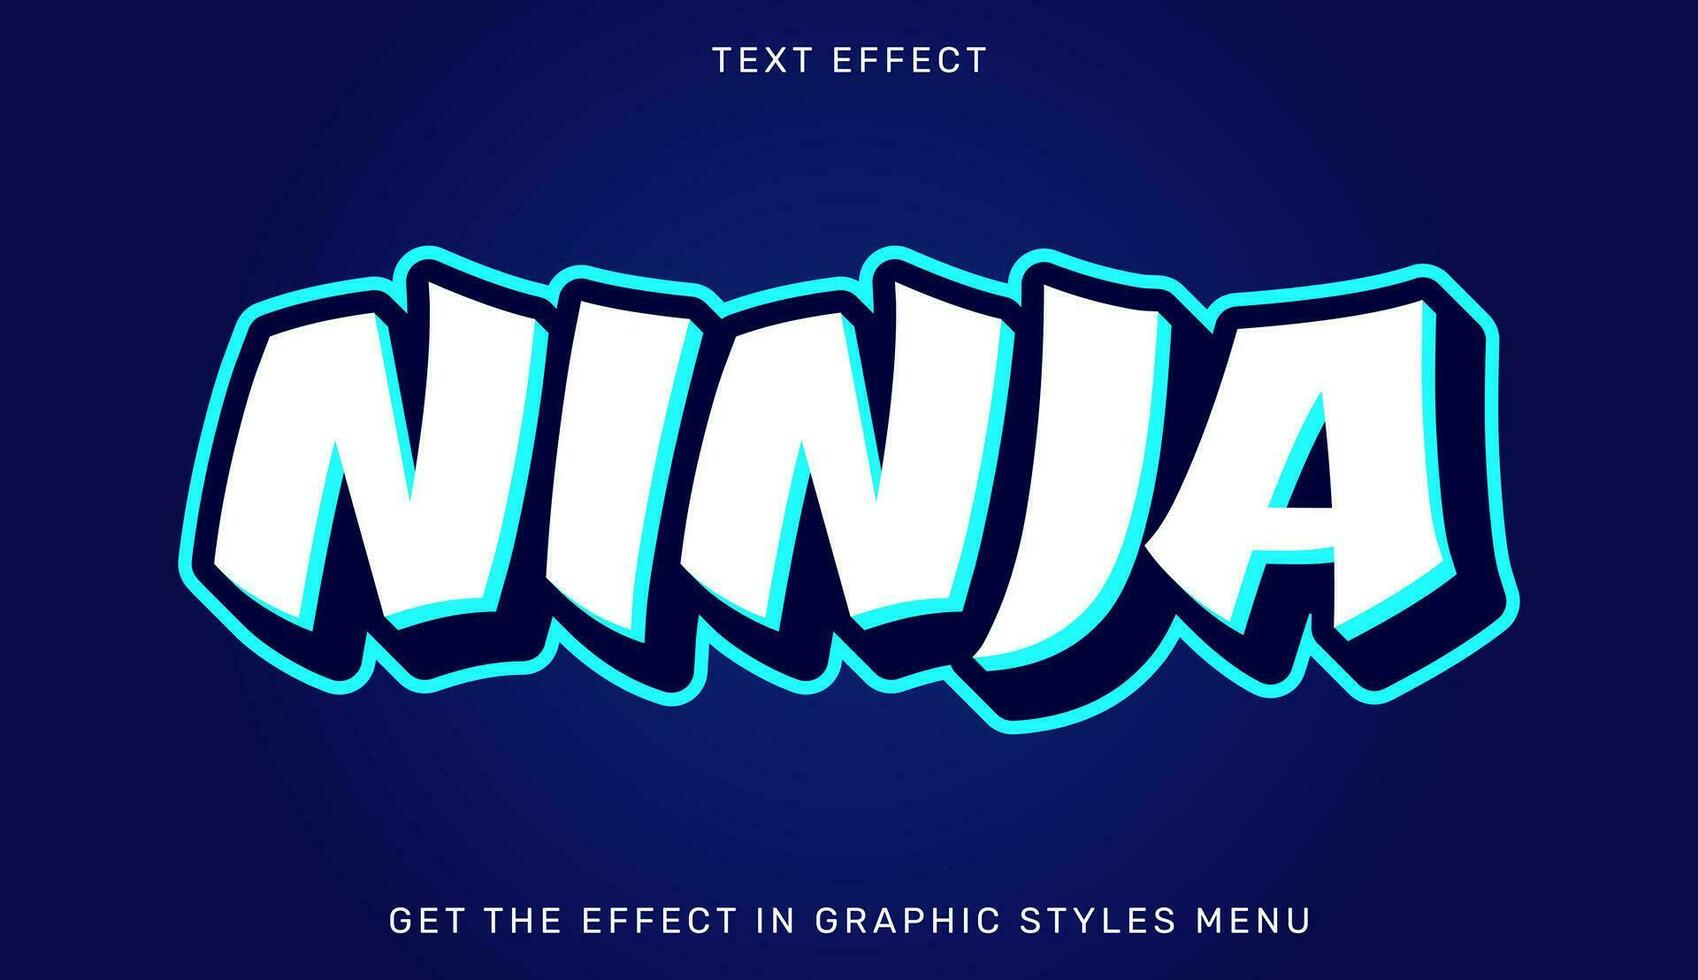 Ninja editable text effect with 3d style. Text emblem for advertising, branding, business logo vector